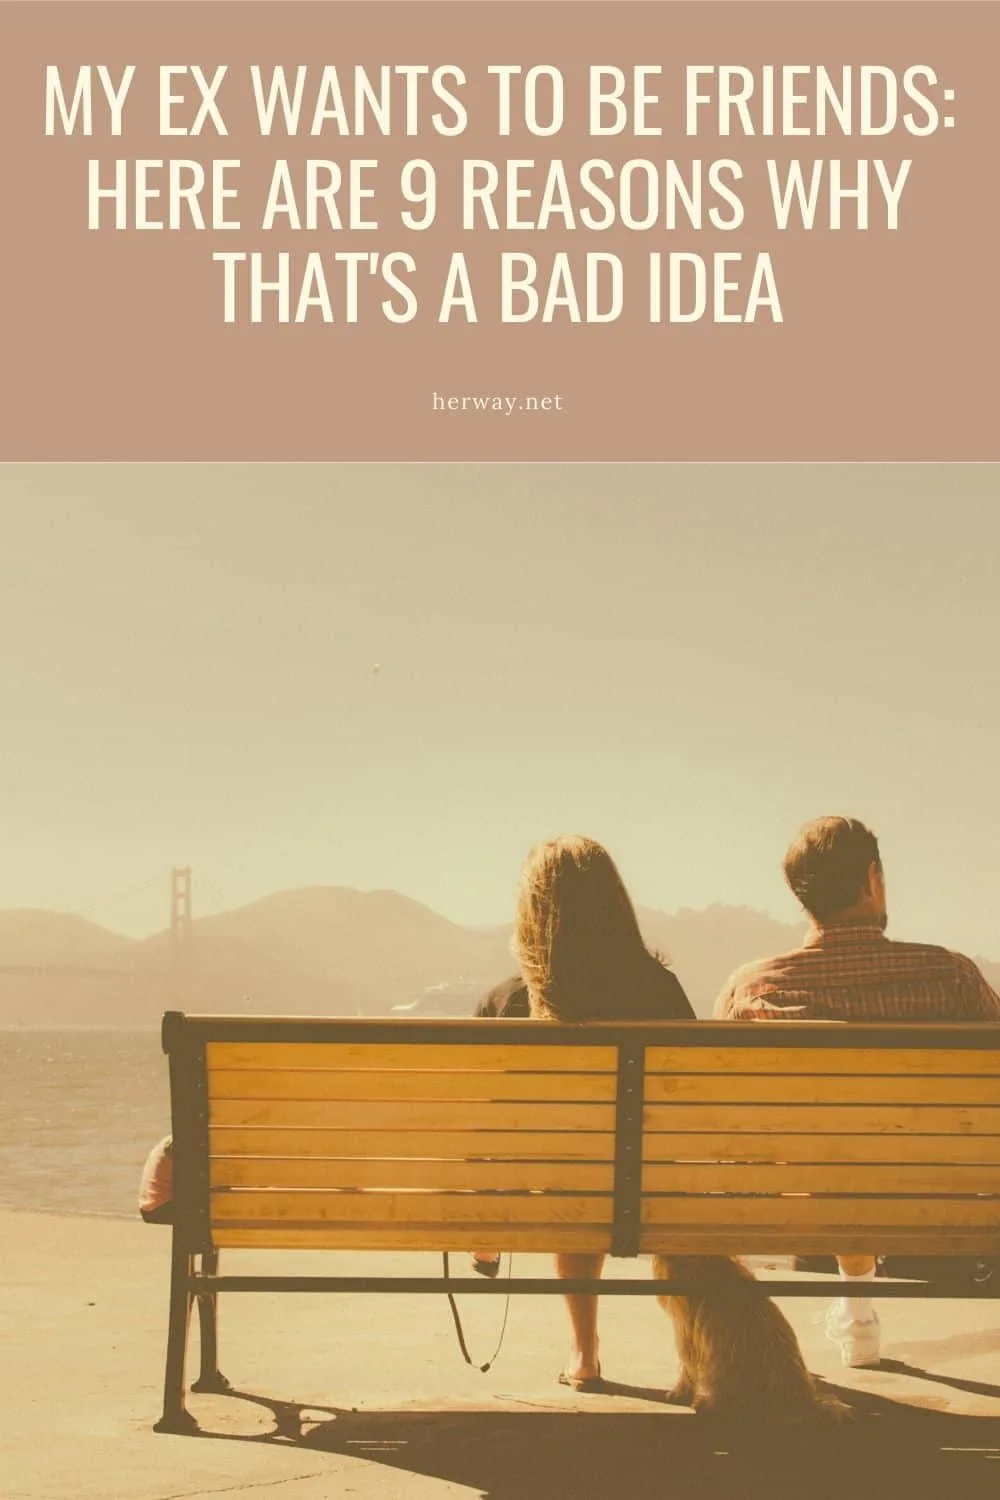 My Ex Wants To Be Friends_ Here Are 9 Reasons Why That's A Bad Idea Pinterest